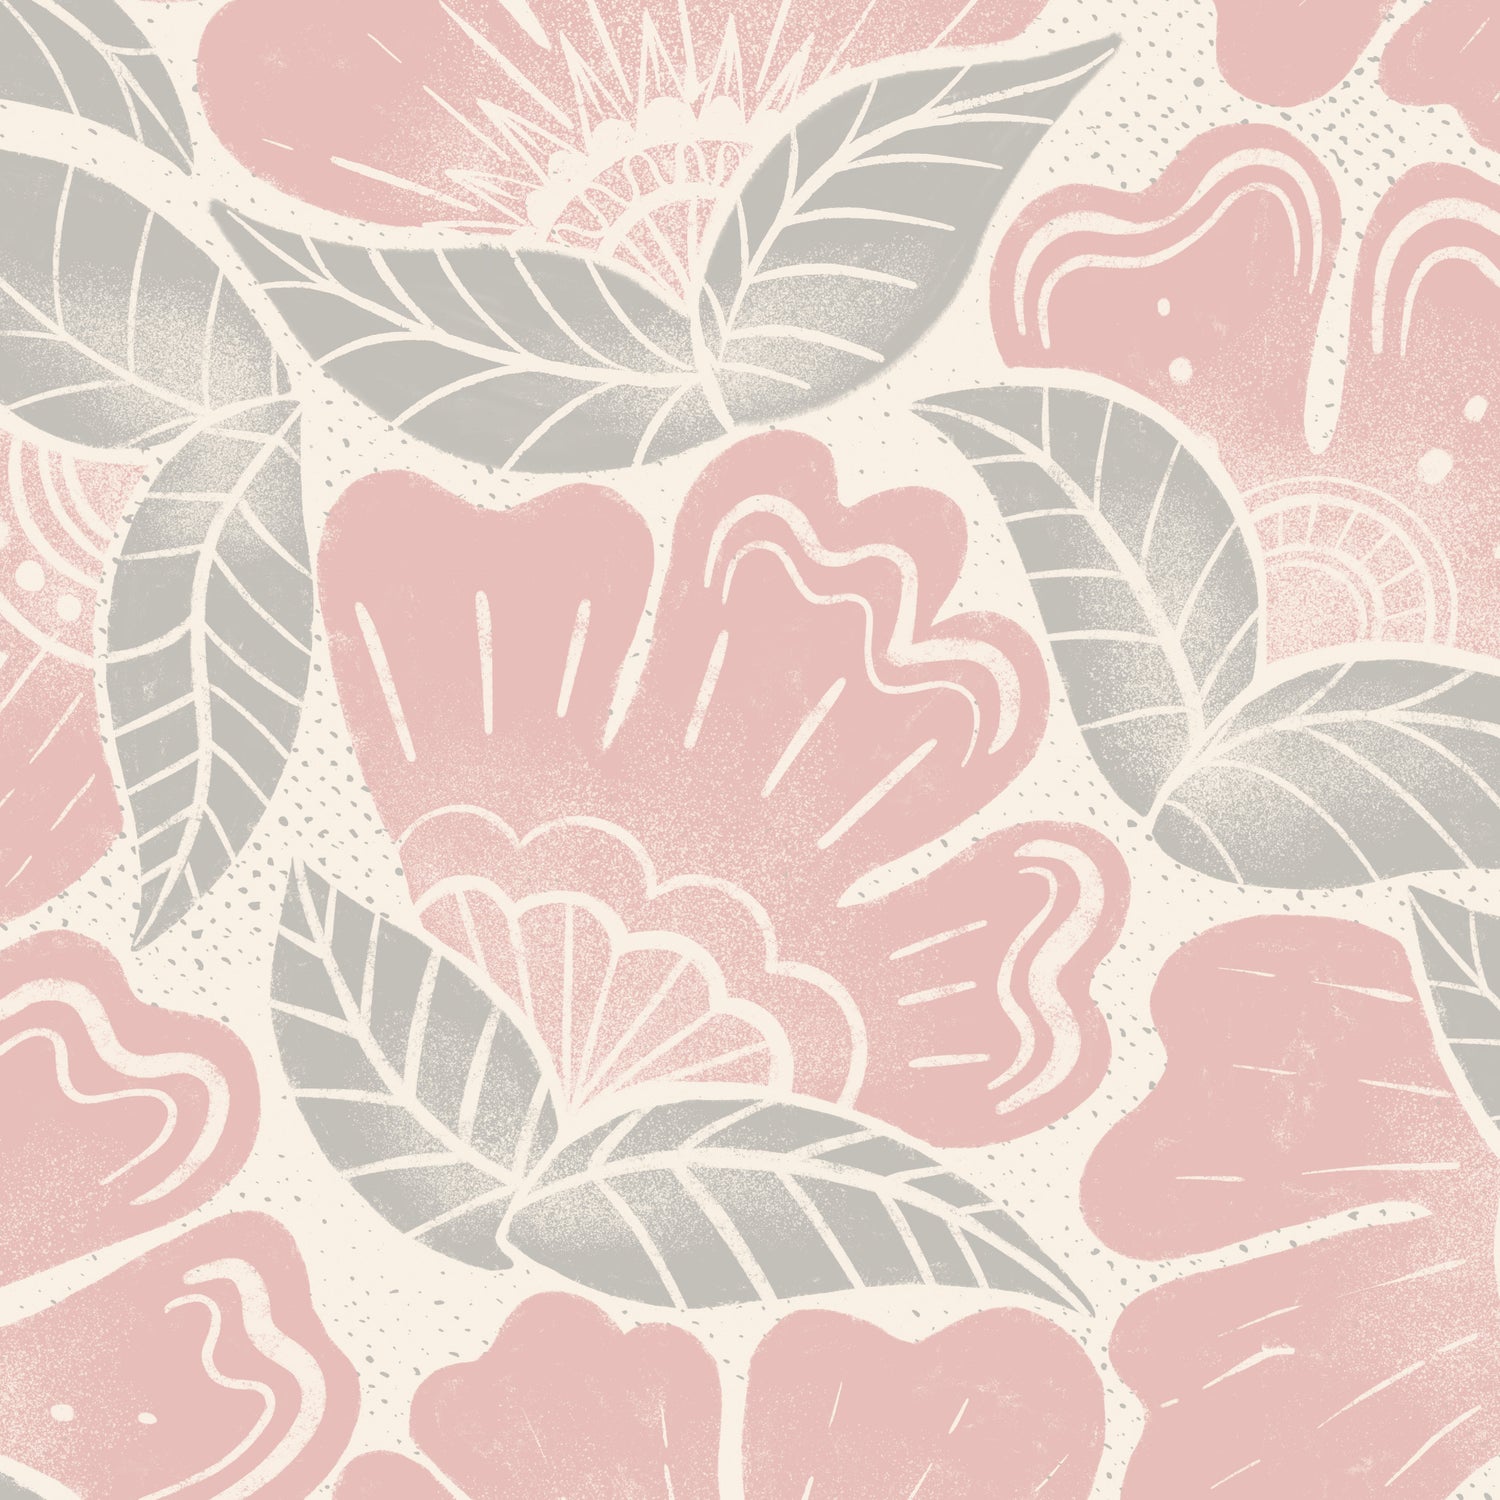 Scattered Flowers Wallpaper in Rosy Pink shown in a close up view.